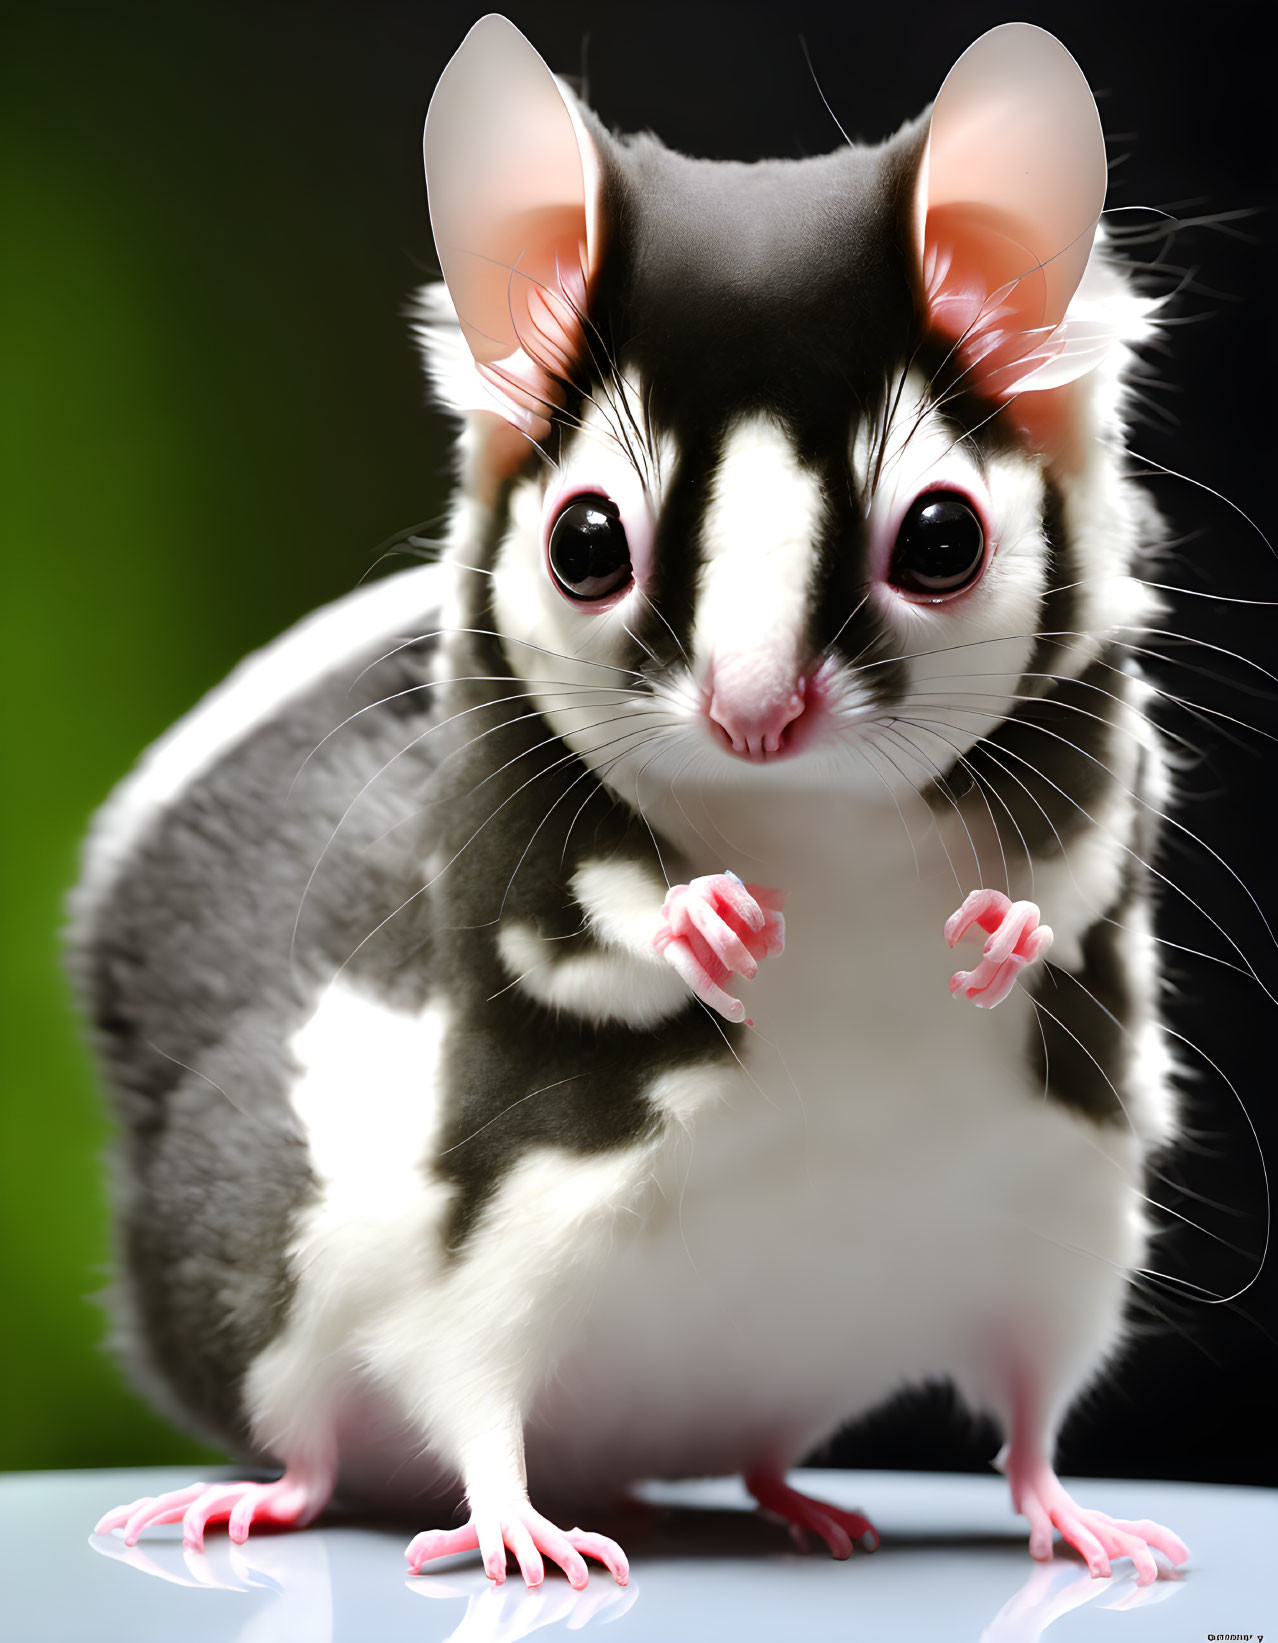 Illustration of animal with sugar glider body and mouse-like head, large eyes and prominent ears